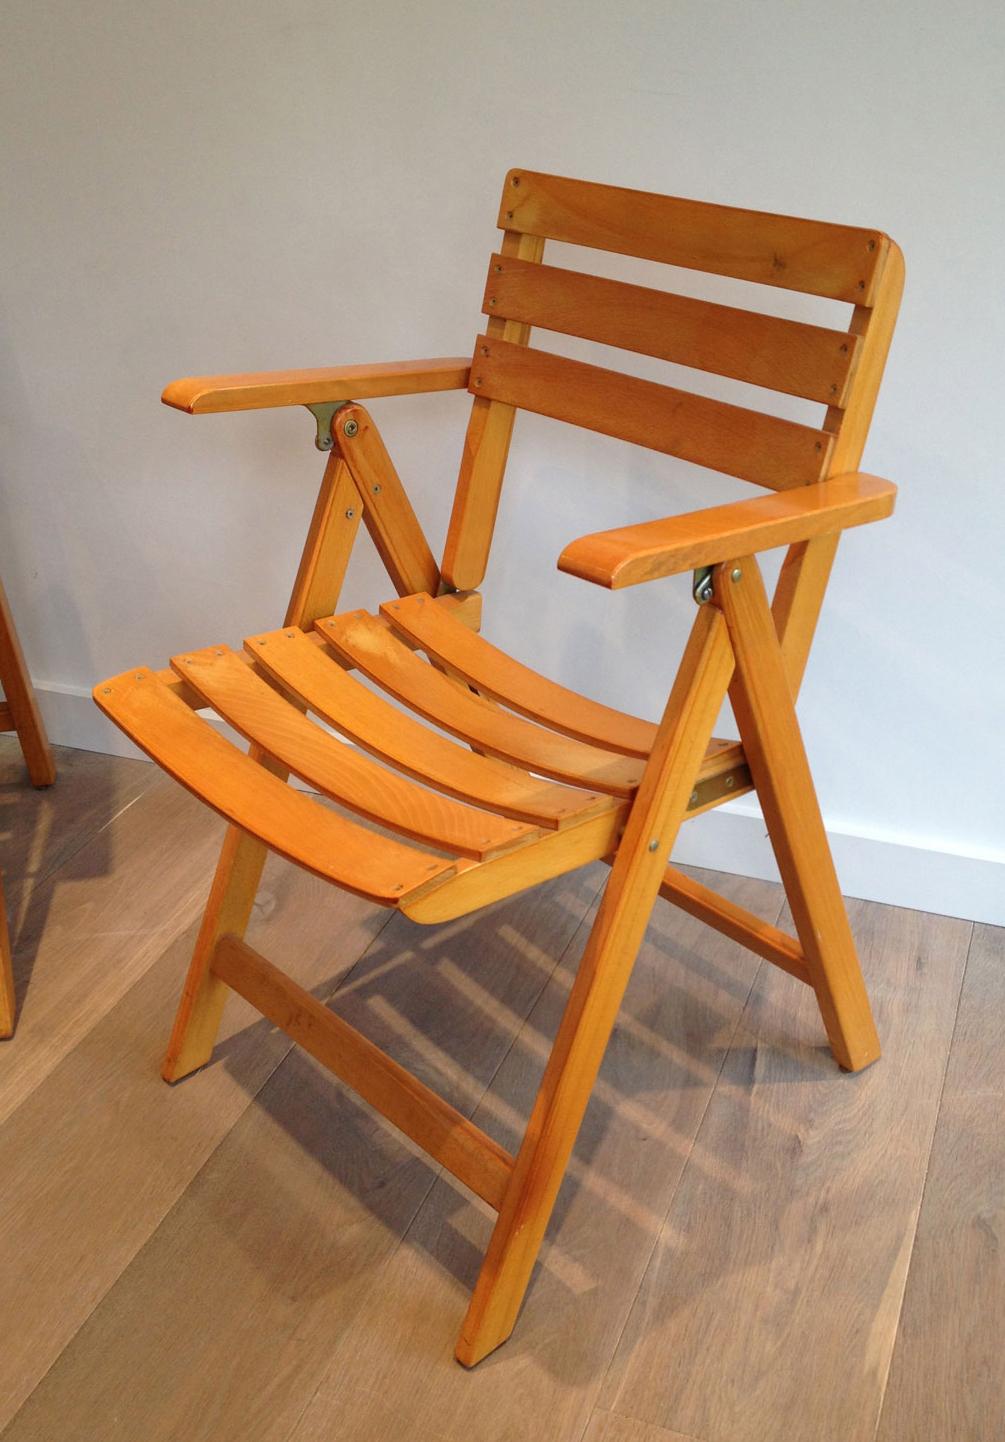 Pair of Wooden Armchairs, French Work Signed Clairitex, Circa 1970 For Sale 4